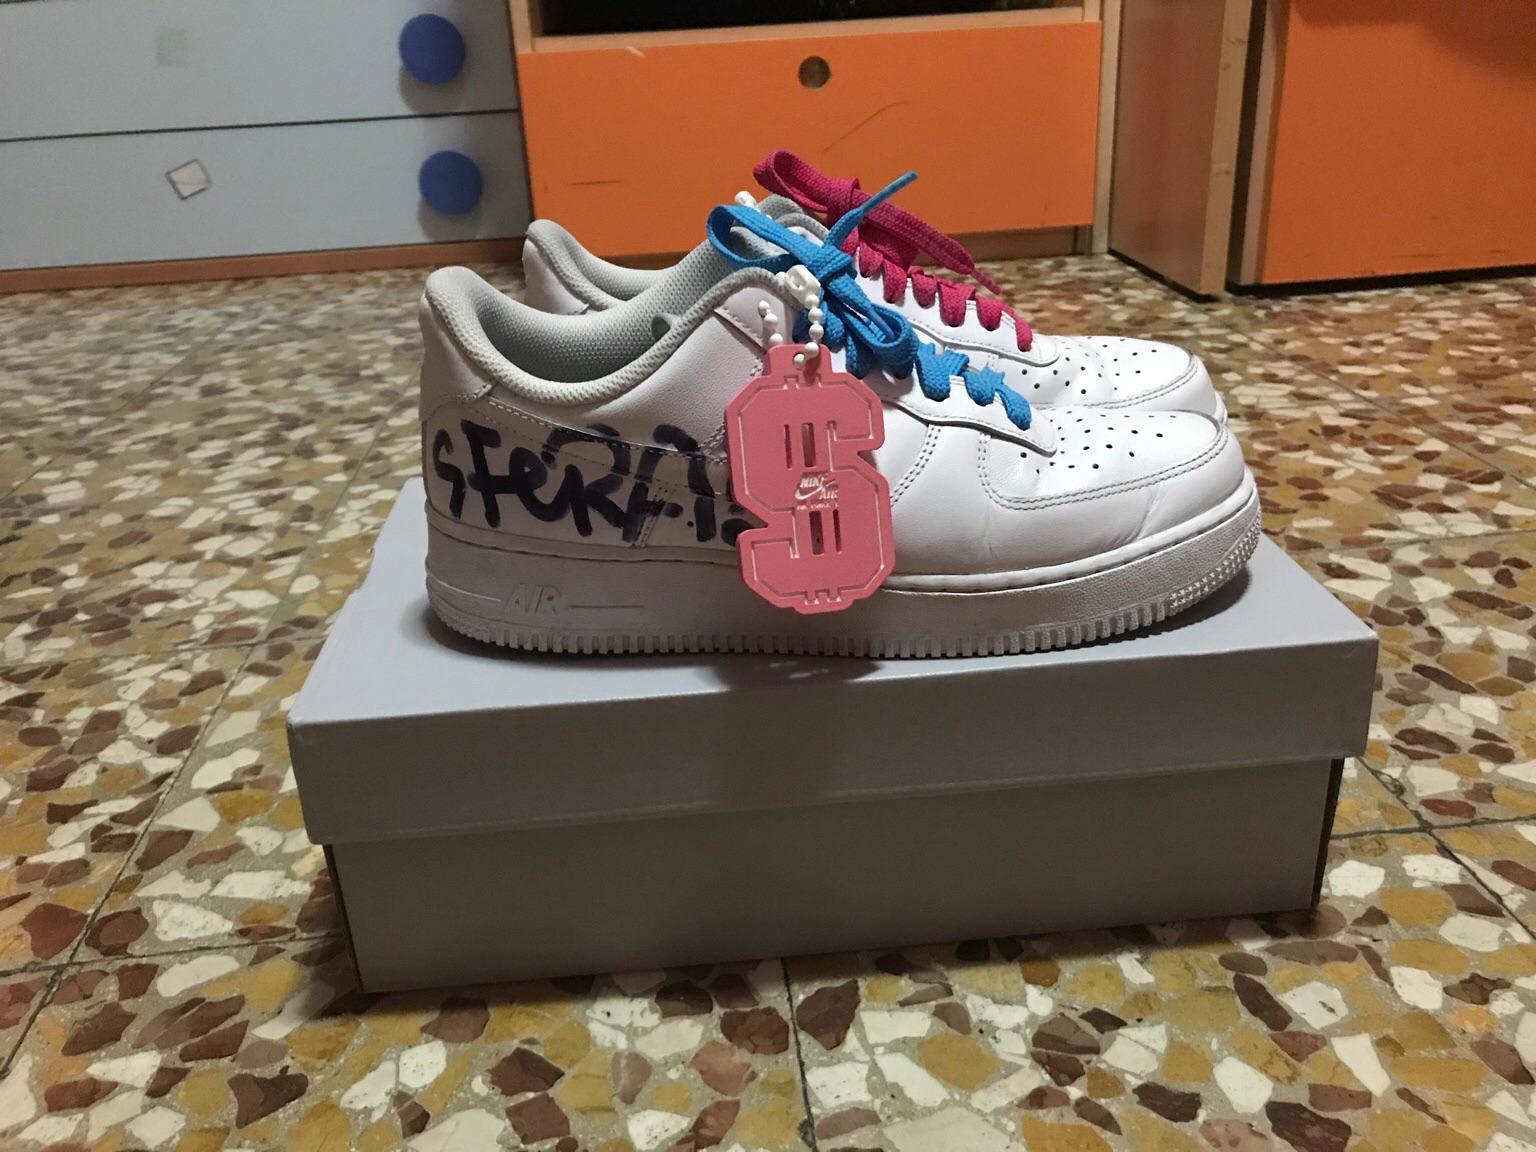 Air Force 1 SFERA EBBASTA in 20156 Milano for €100.00 for sale | Shpock